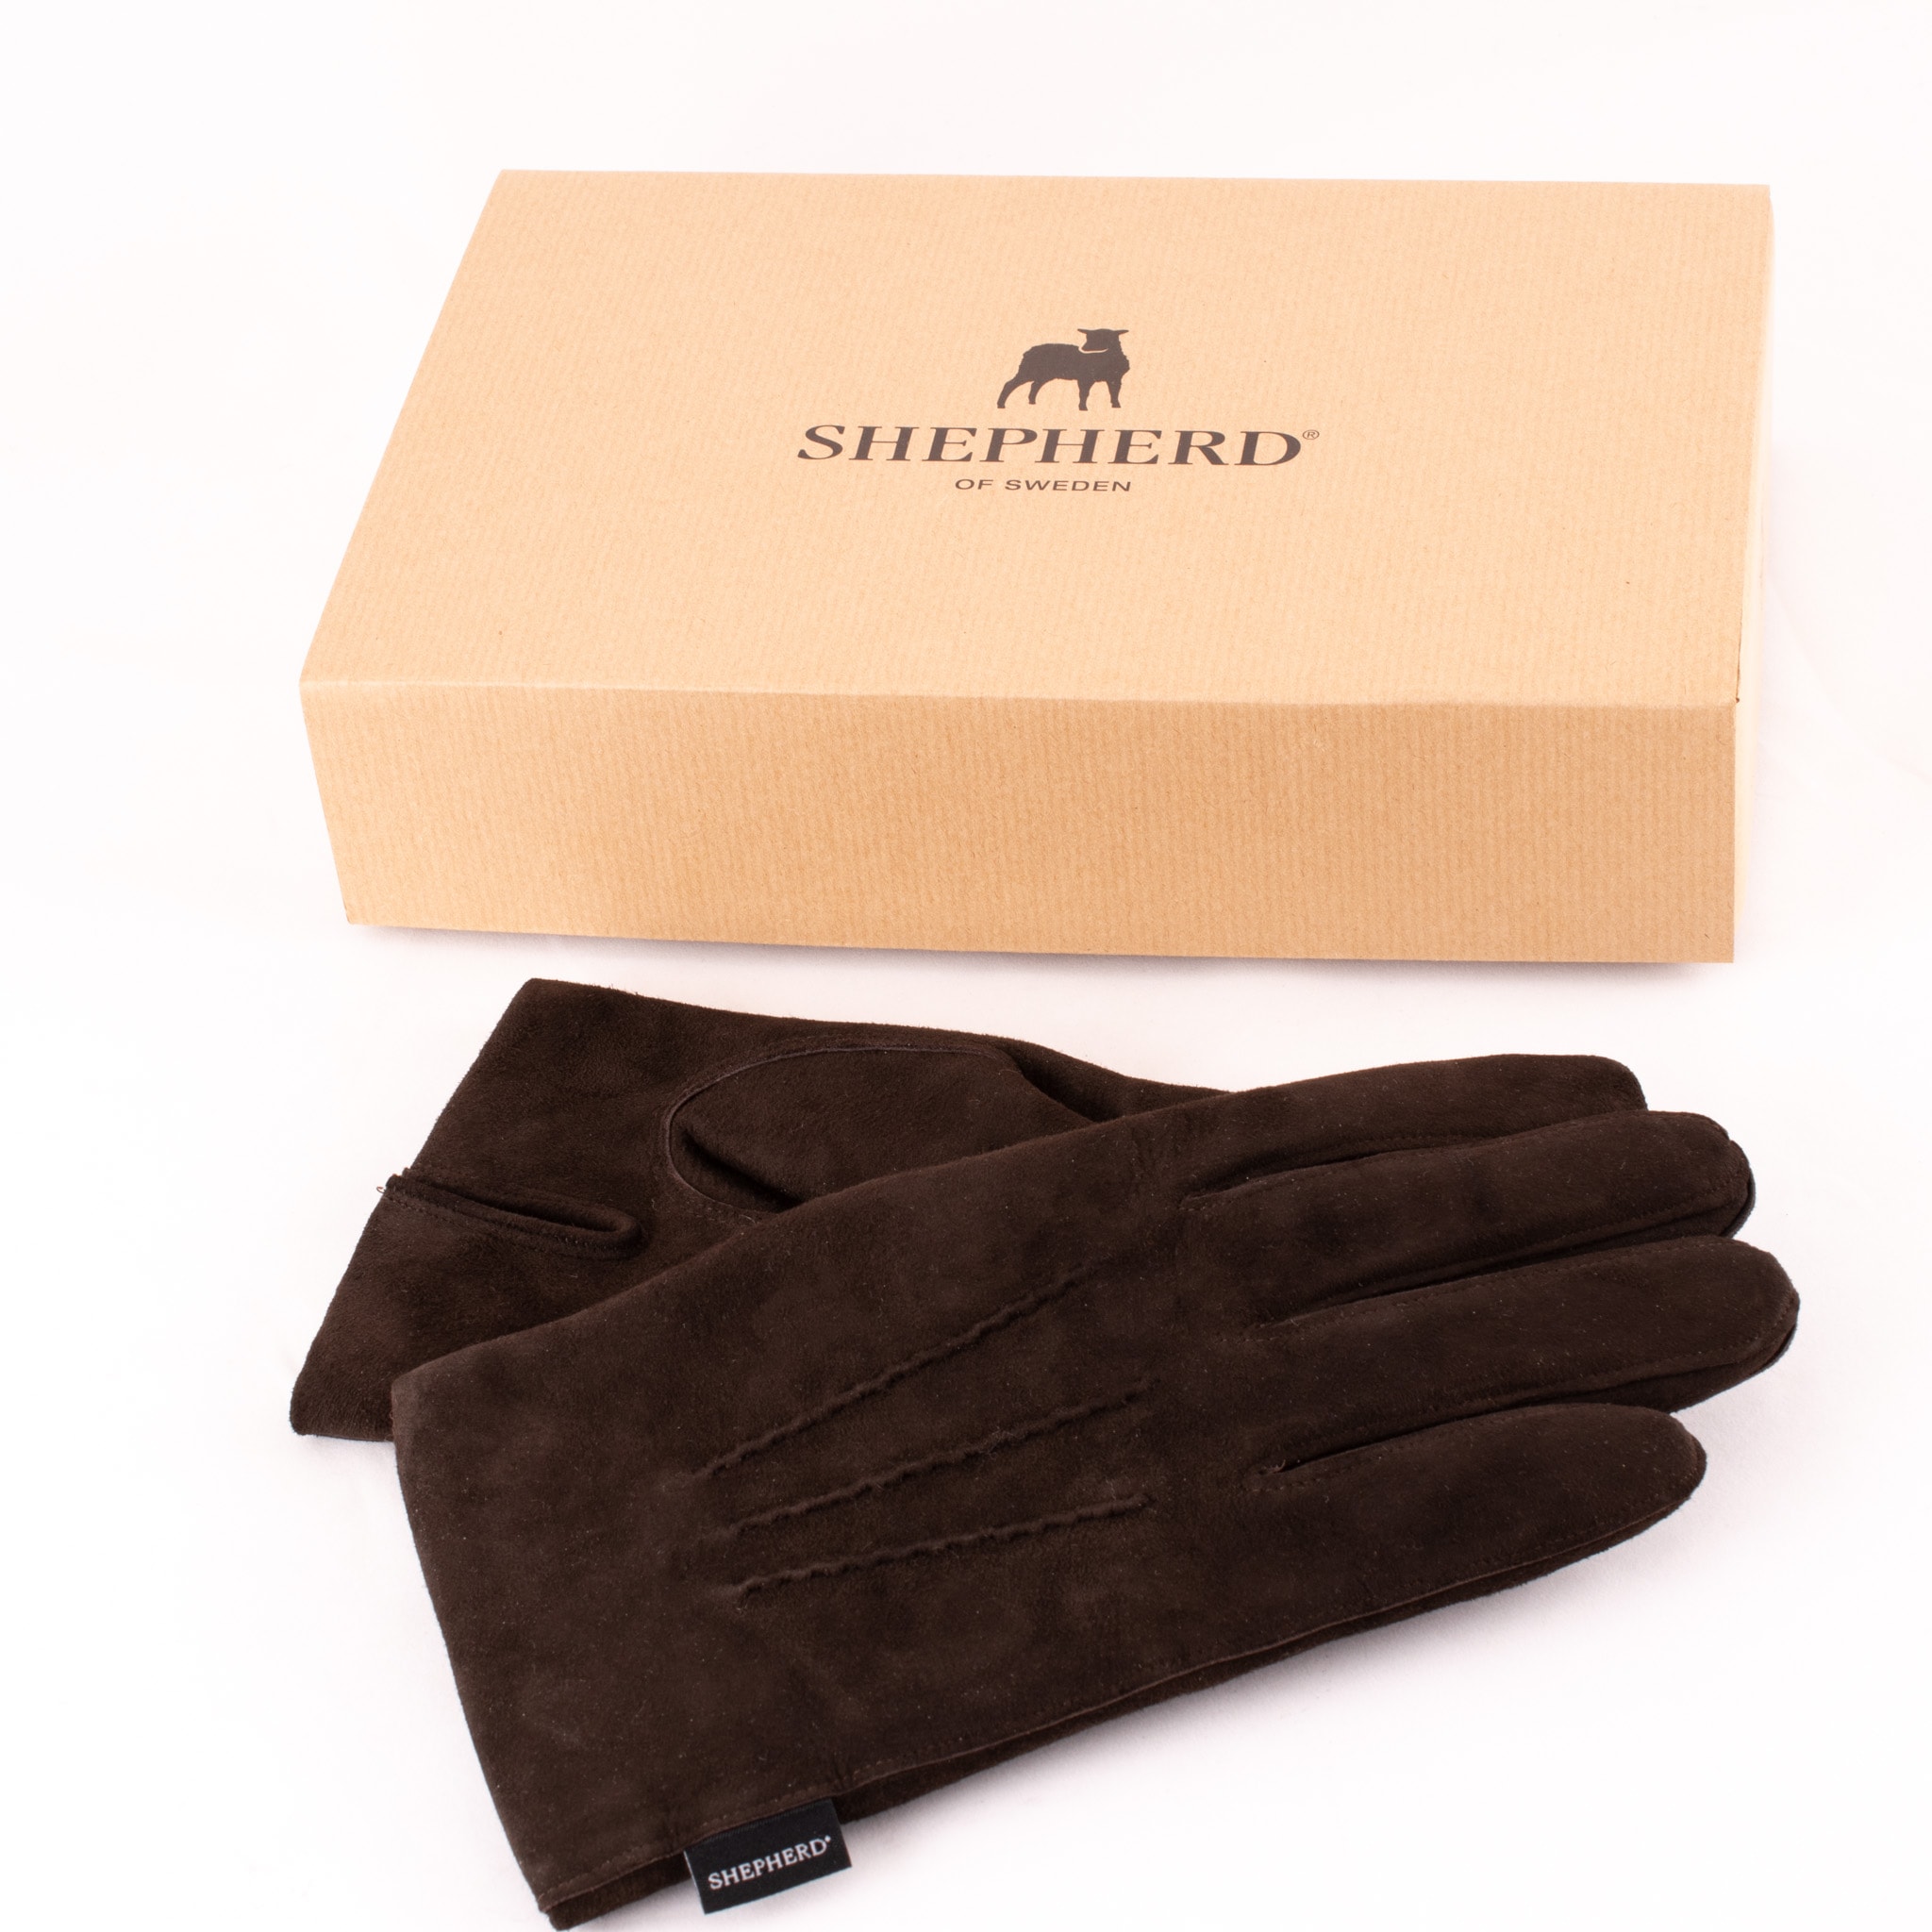 Shepherd glove in suede lined with wool